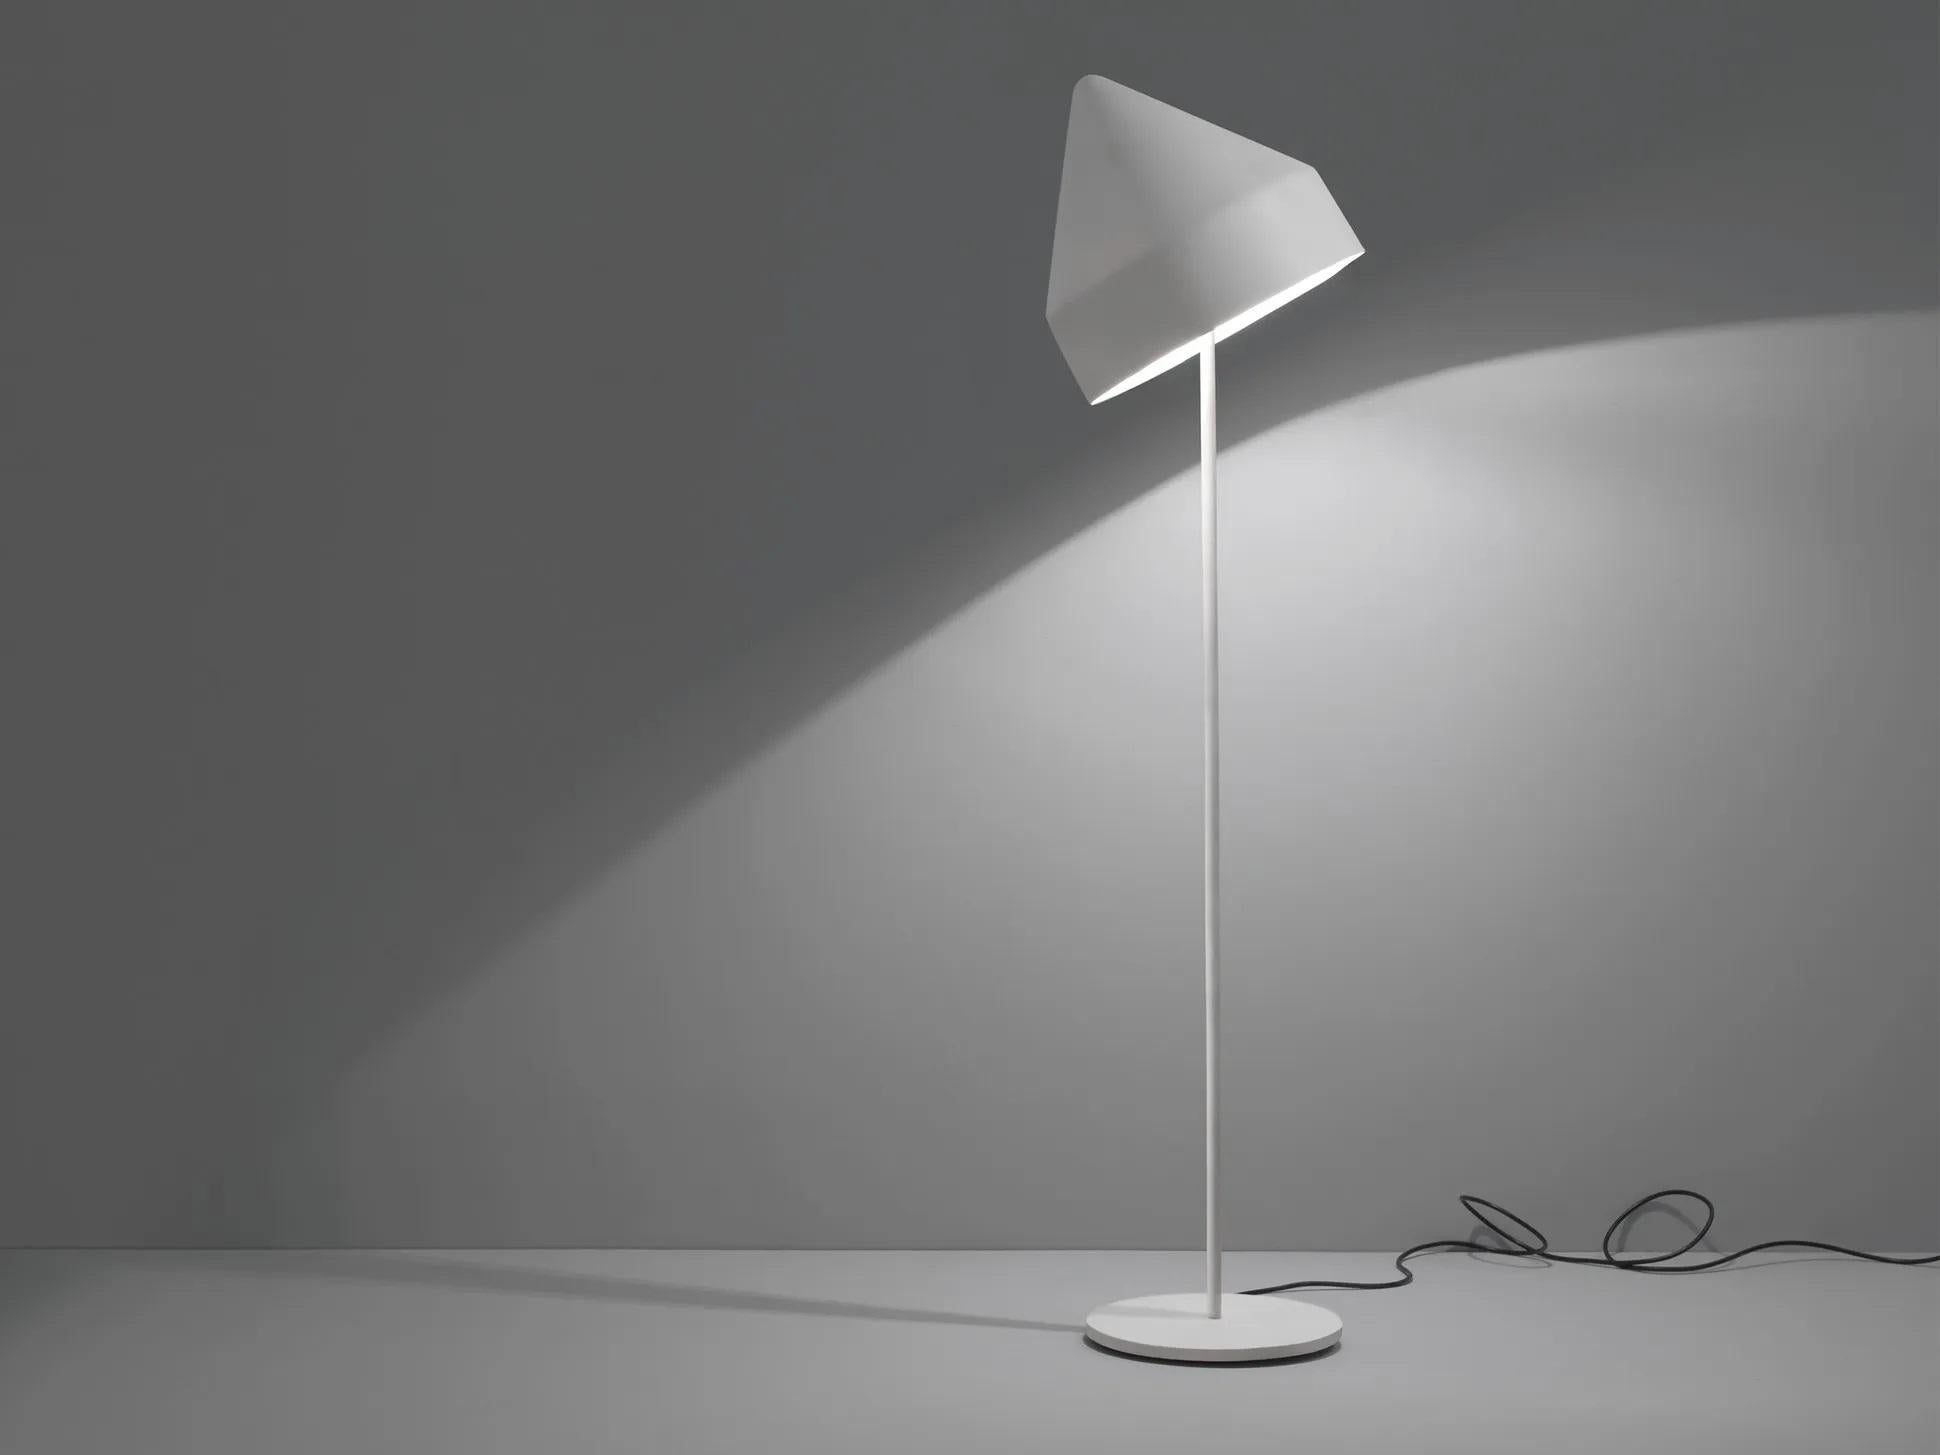 Ludmilla pendant lamp by Imperfettolab
2015
Designer : Verter Turroni
Dimensions: Ø 32 X 159 cm
Materials: Fibreglass

Its geometric elegance, the enigmatic aura, the inclination that makes light and shadow dance, make this lamp unique.